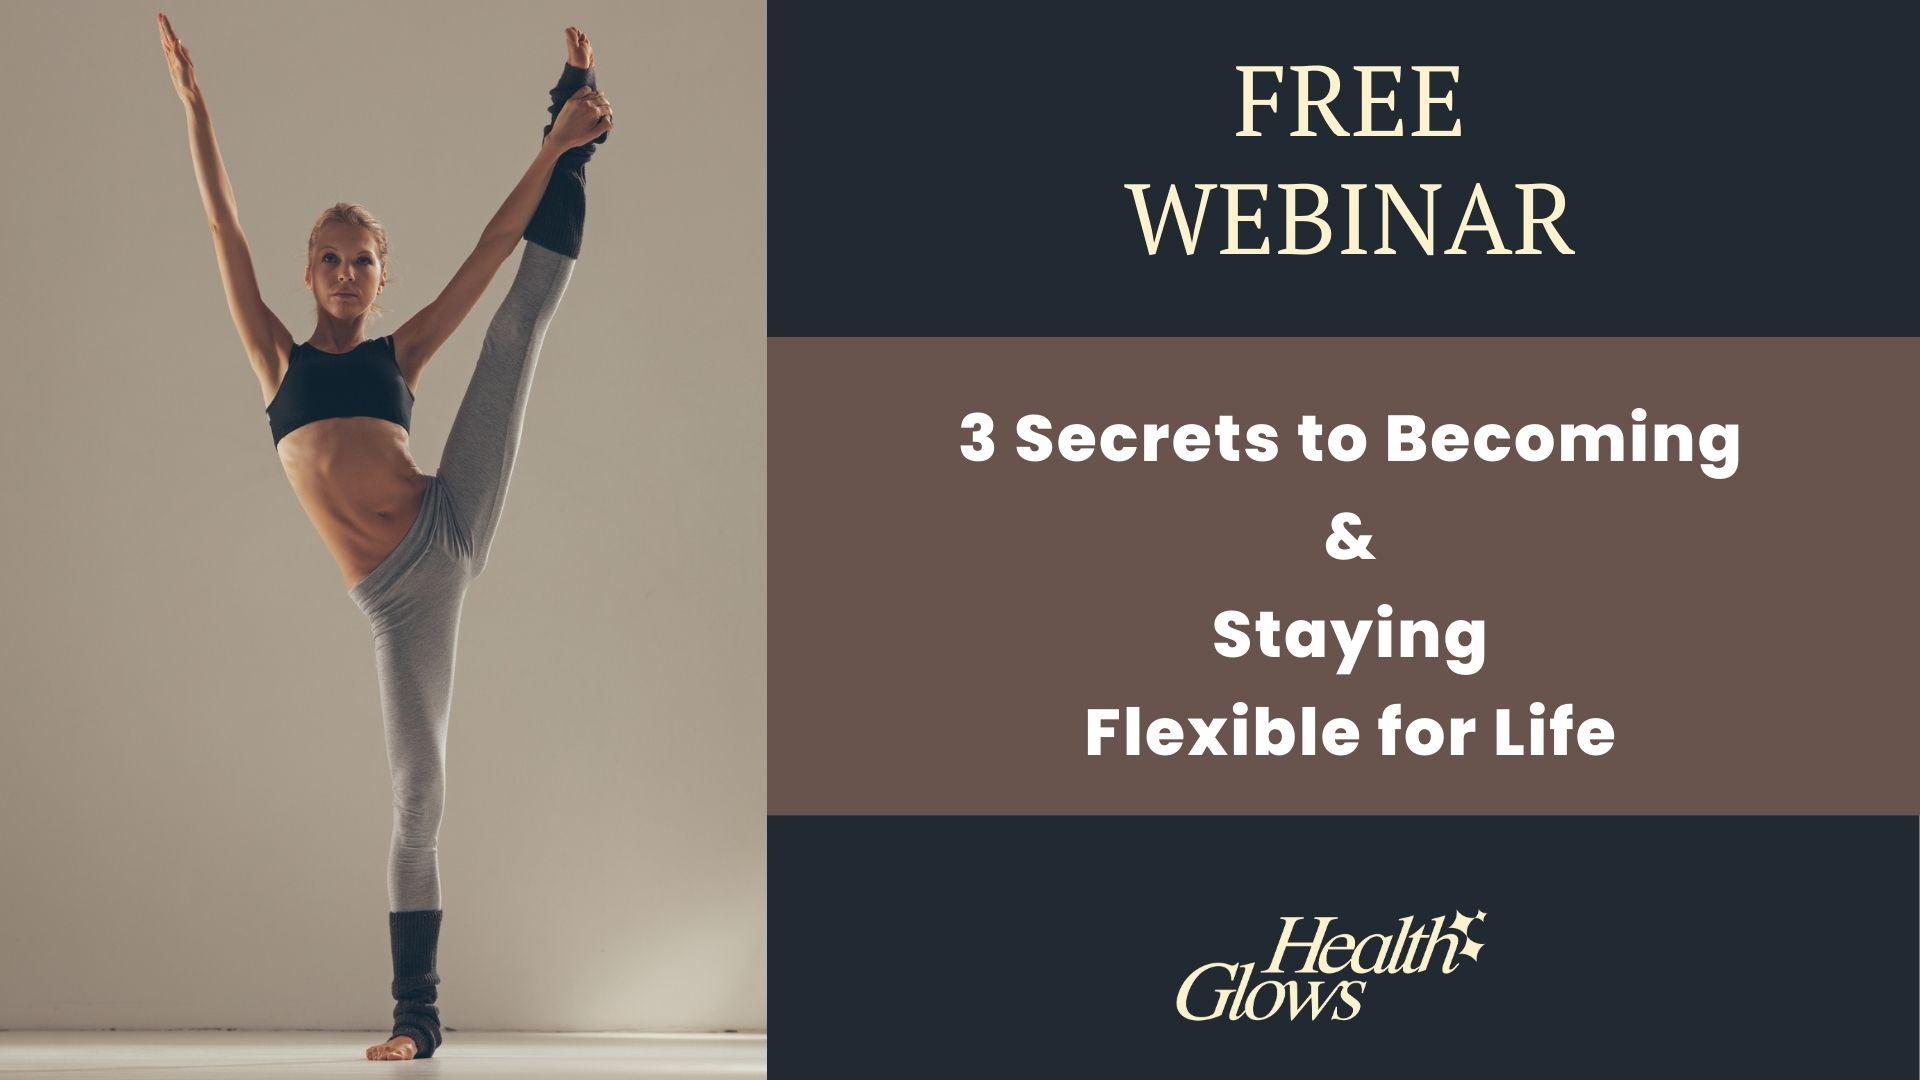 Free Webinar '3 Secrets to Becoming & Staying Flexible for Life' - Learn how to achieve and maintain a flexible body.